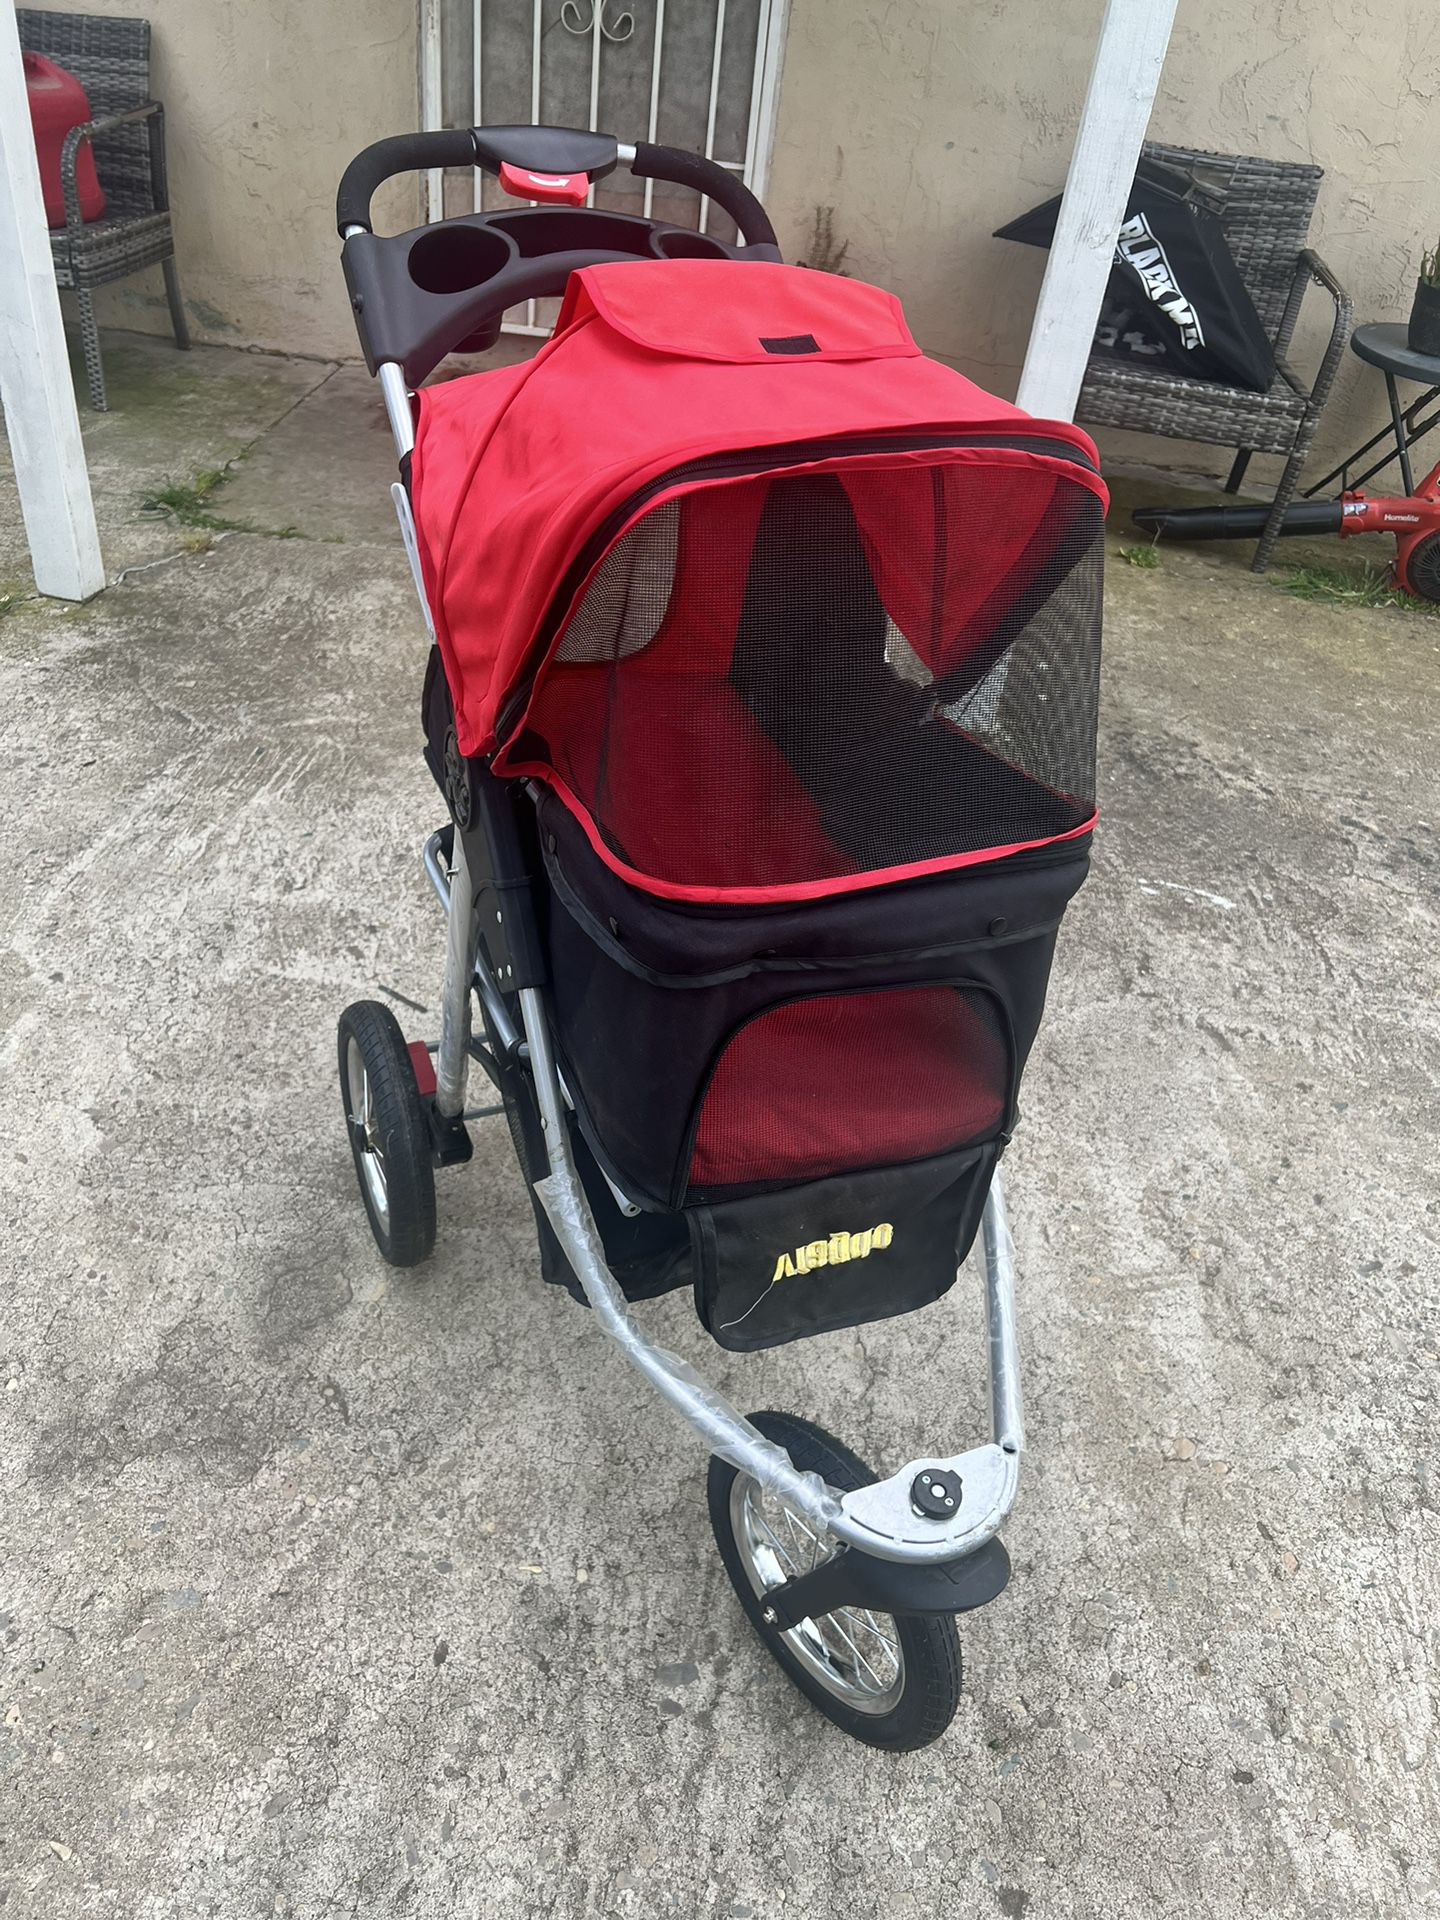 Dog Stroller Almost New FIRM Price